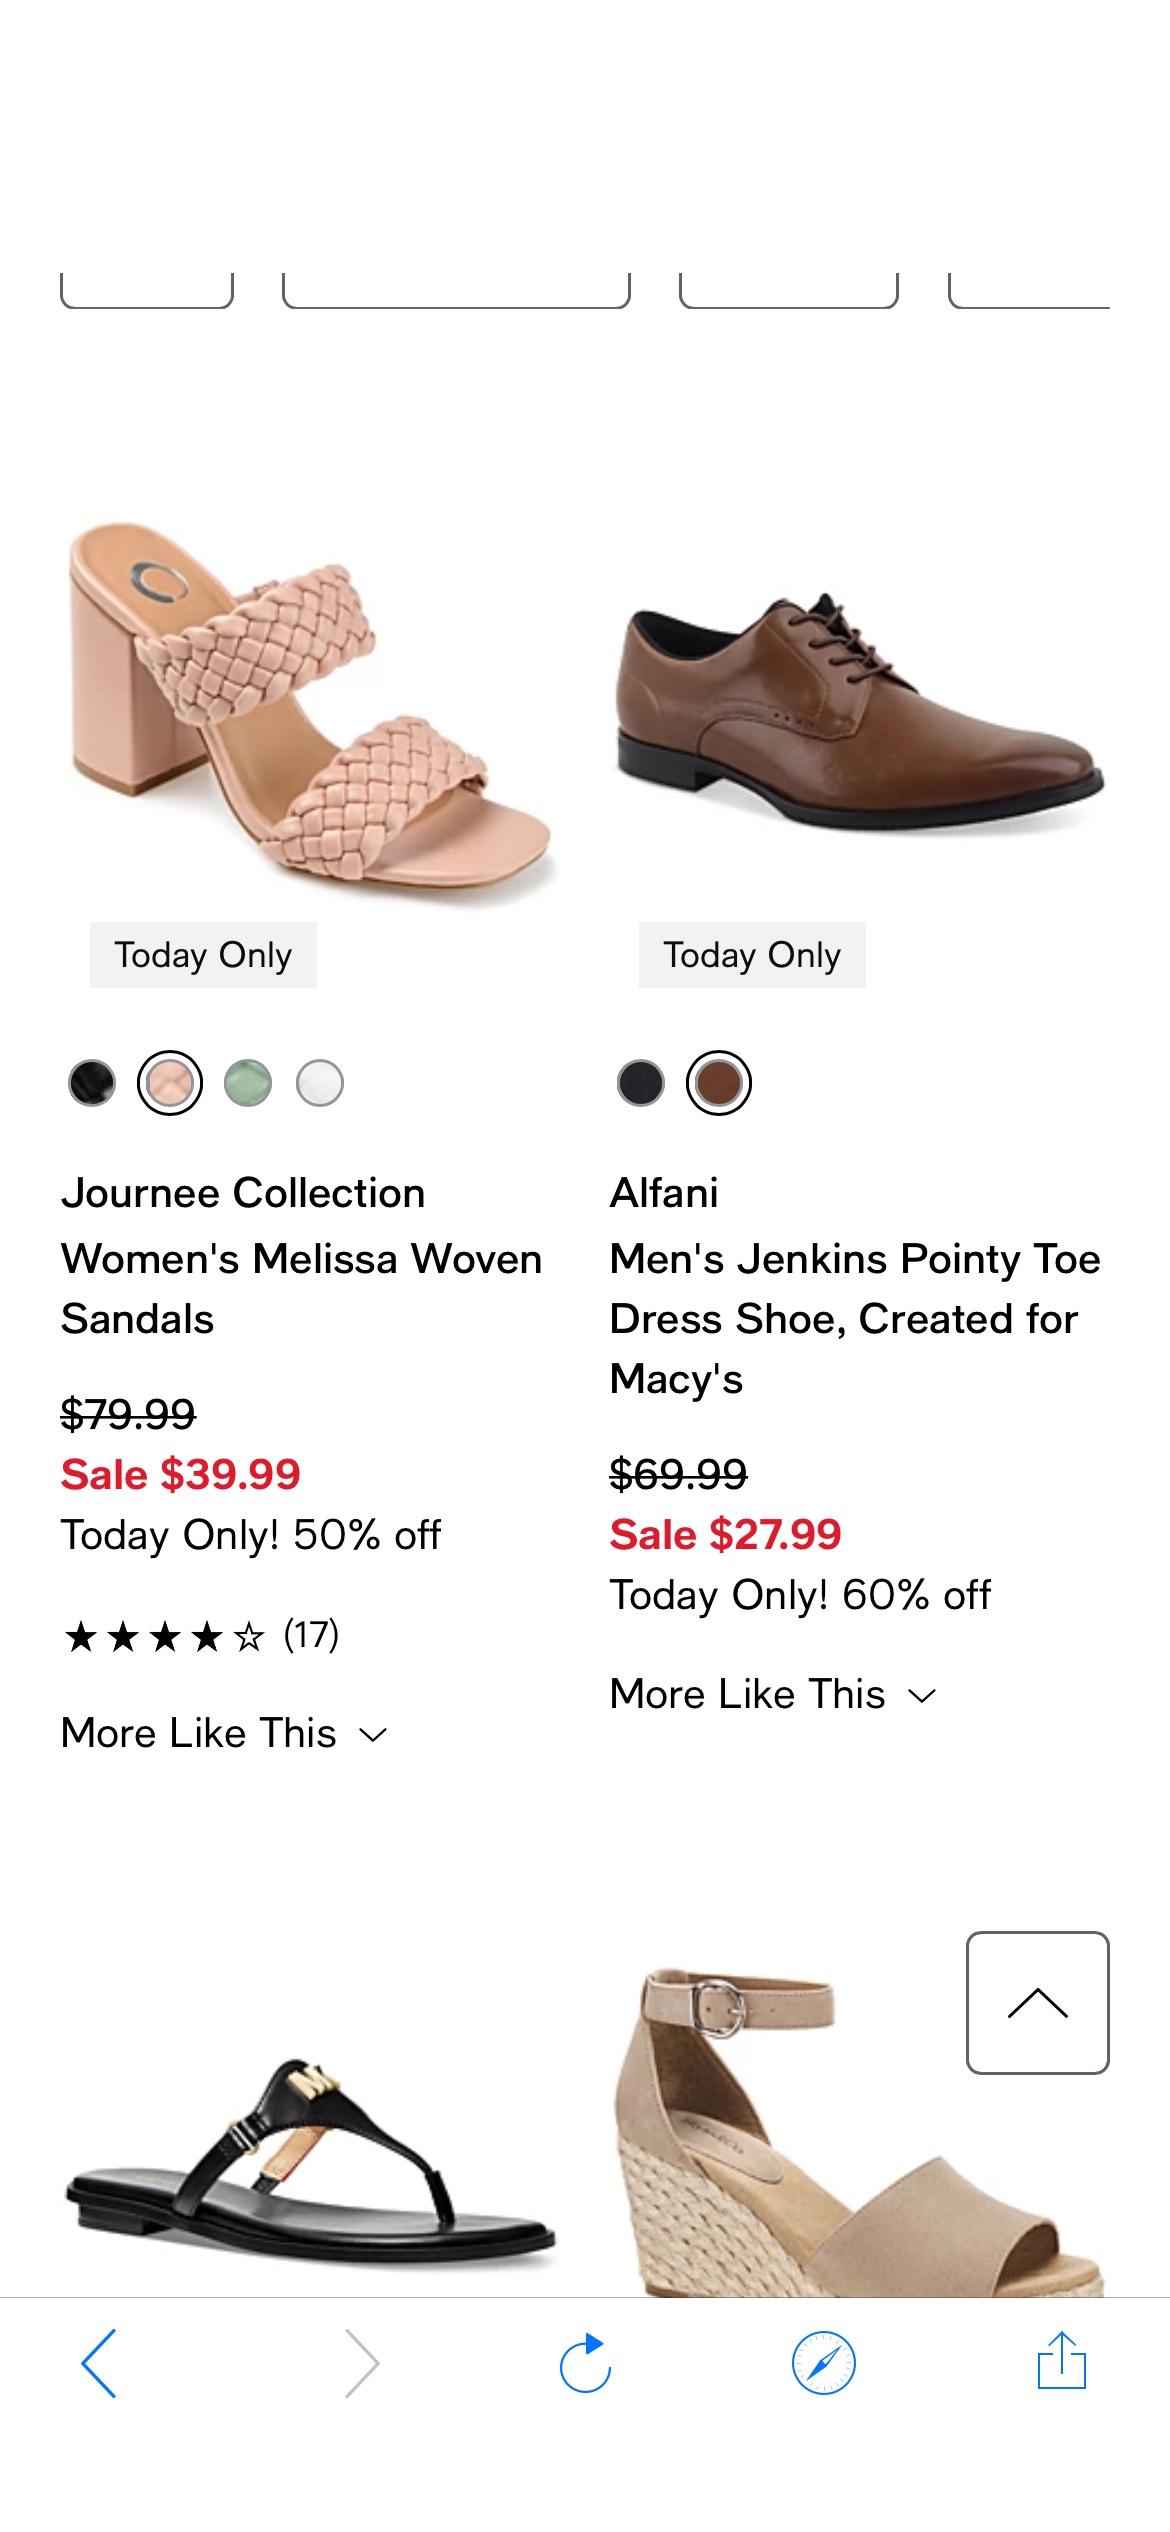 50-60% off of shoes Sale - Today Only! Flash Sale - Macy's